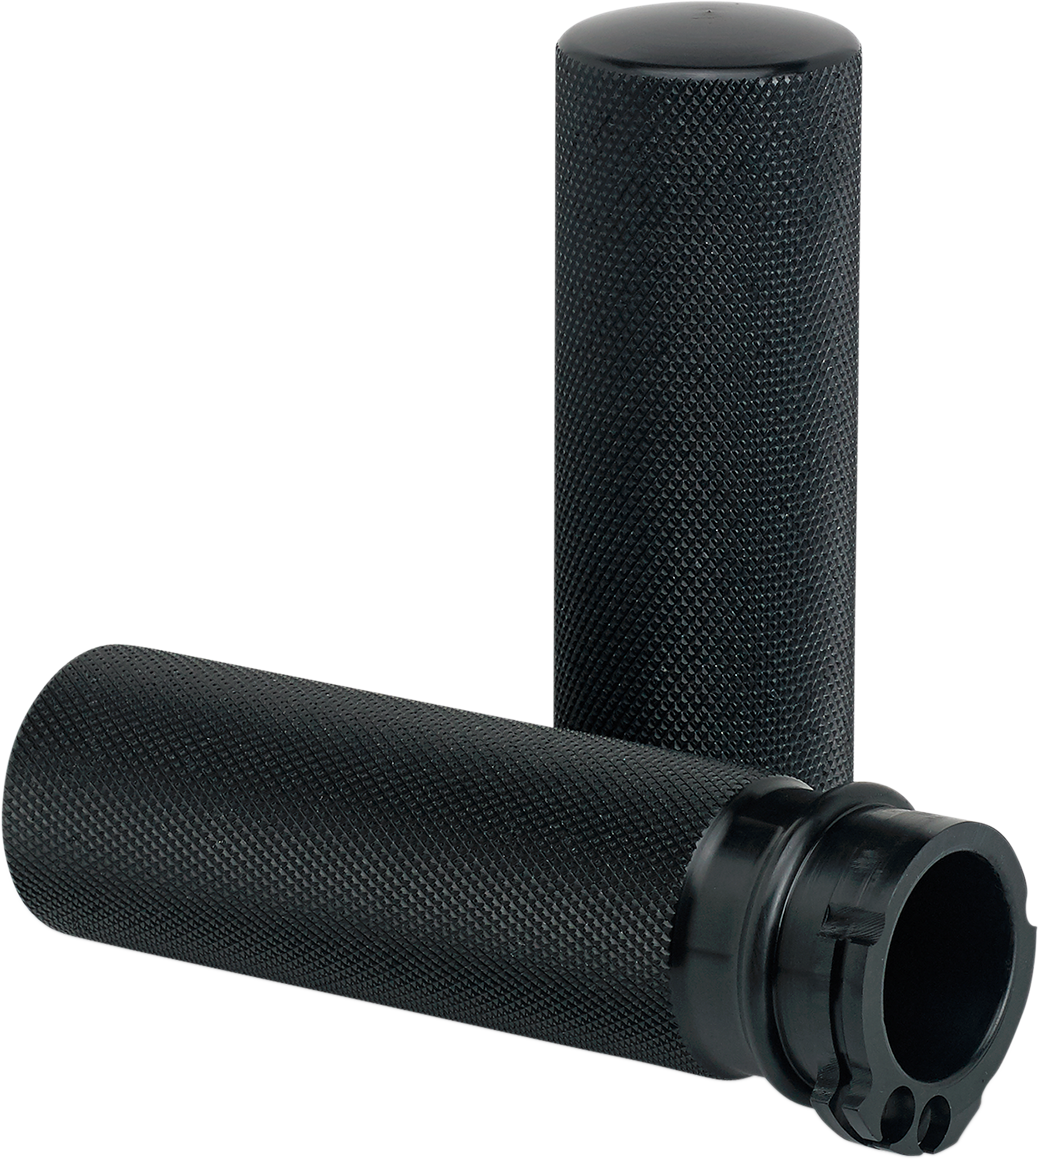 0630-2123 - JOKER MACHINE Grips - Knurled - Cable - Black 03-93-1